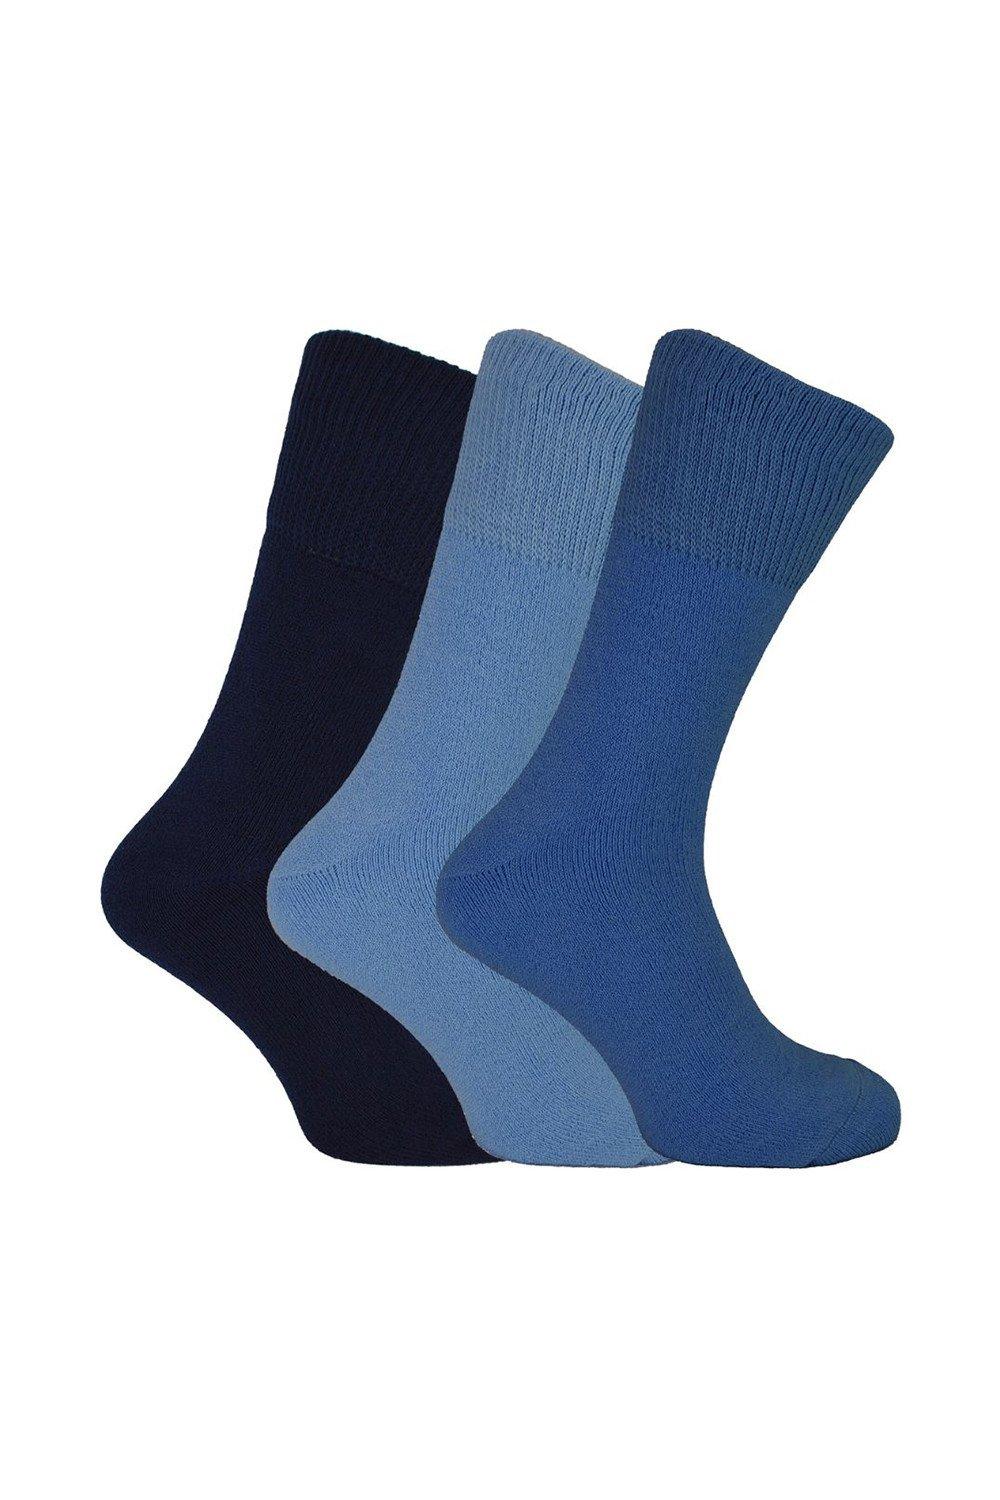 3 Pairs Thick Soft Bamboo Thermal Socks for Winter